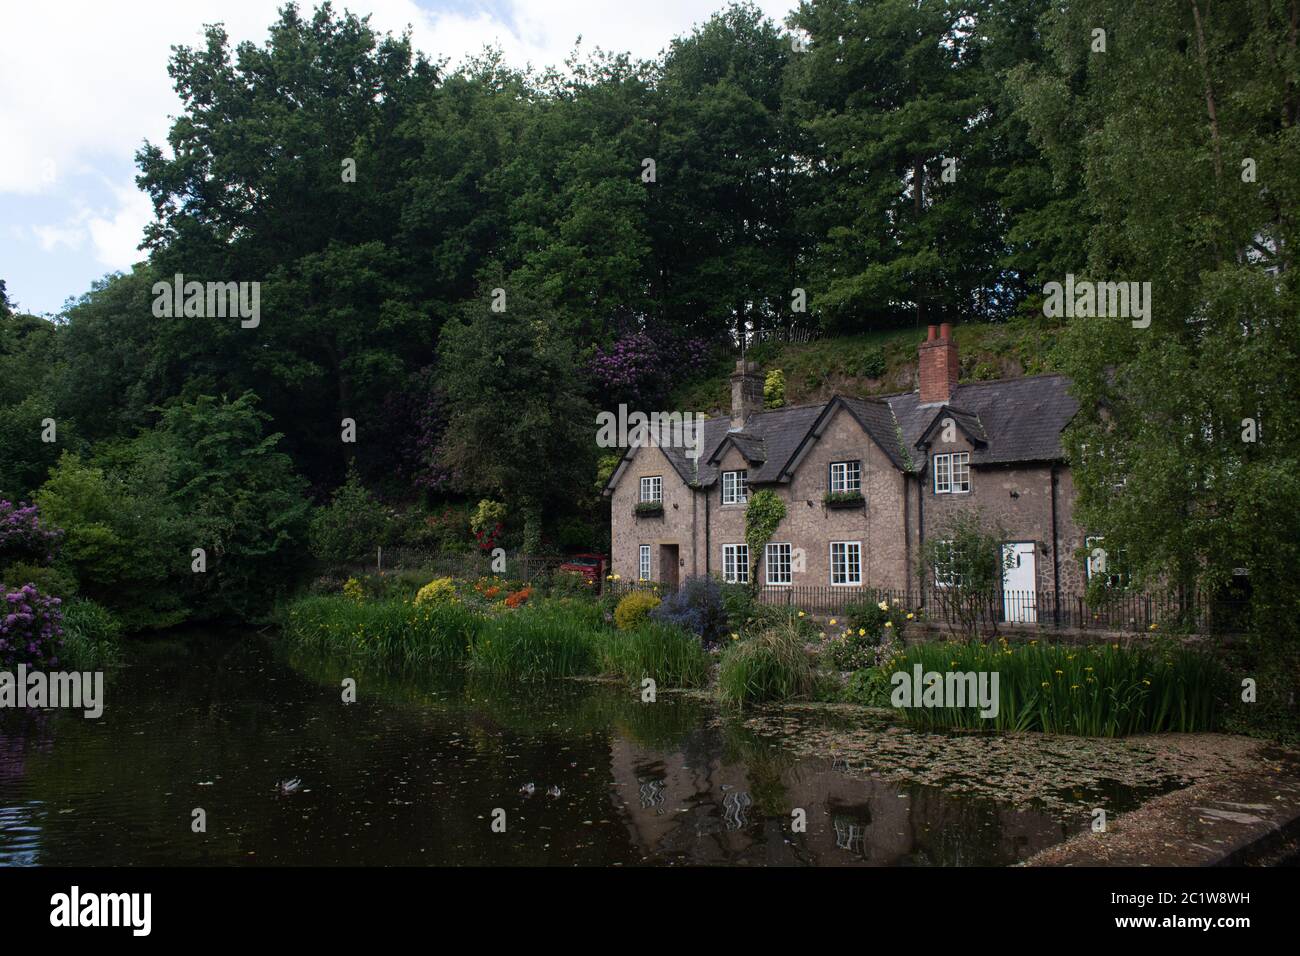 May 2020 (Lymm, Cheshire) A view of a village cottage row with tree's in the background and a village pond in the foreground Stock Photo